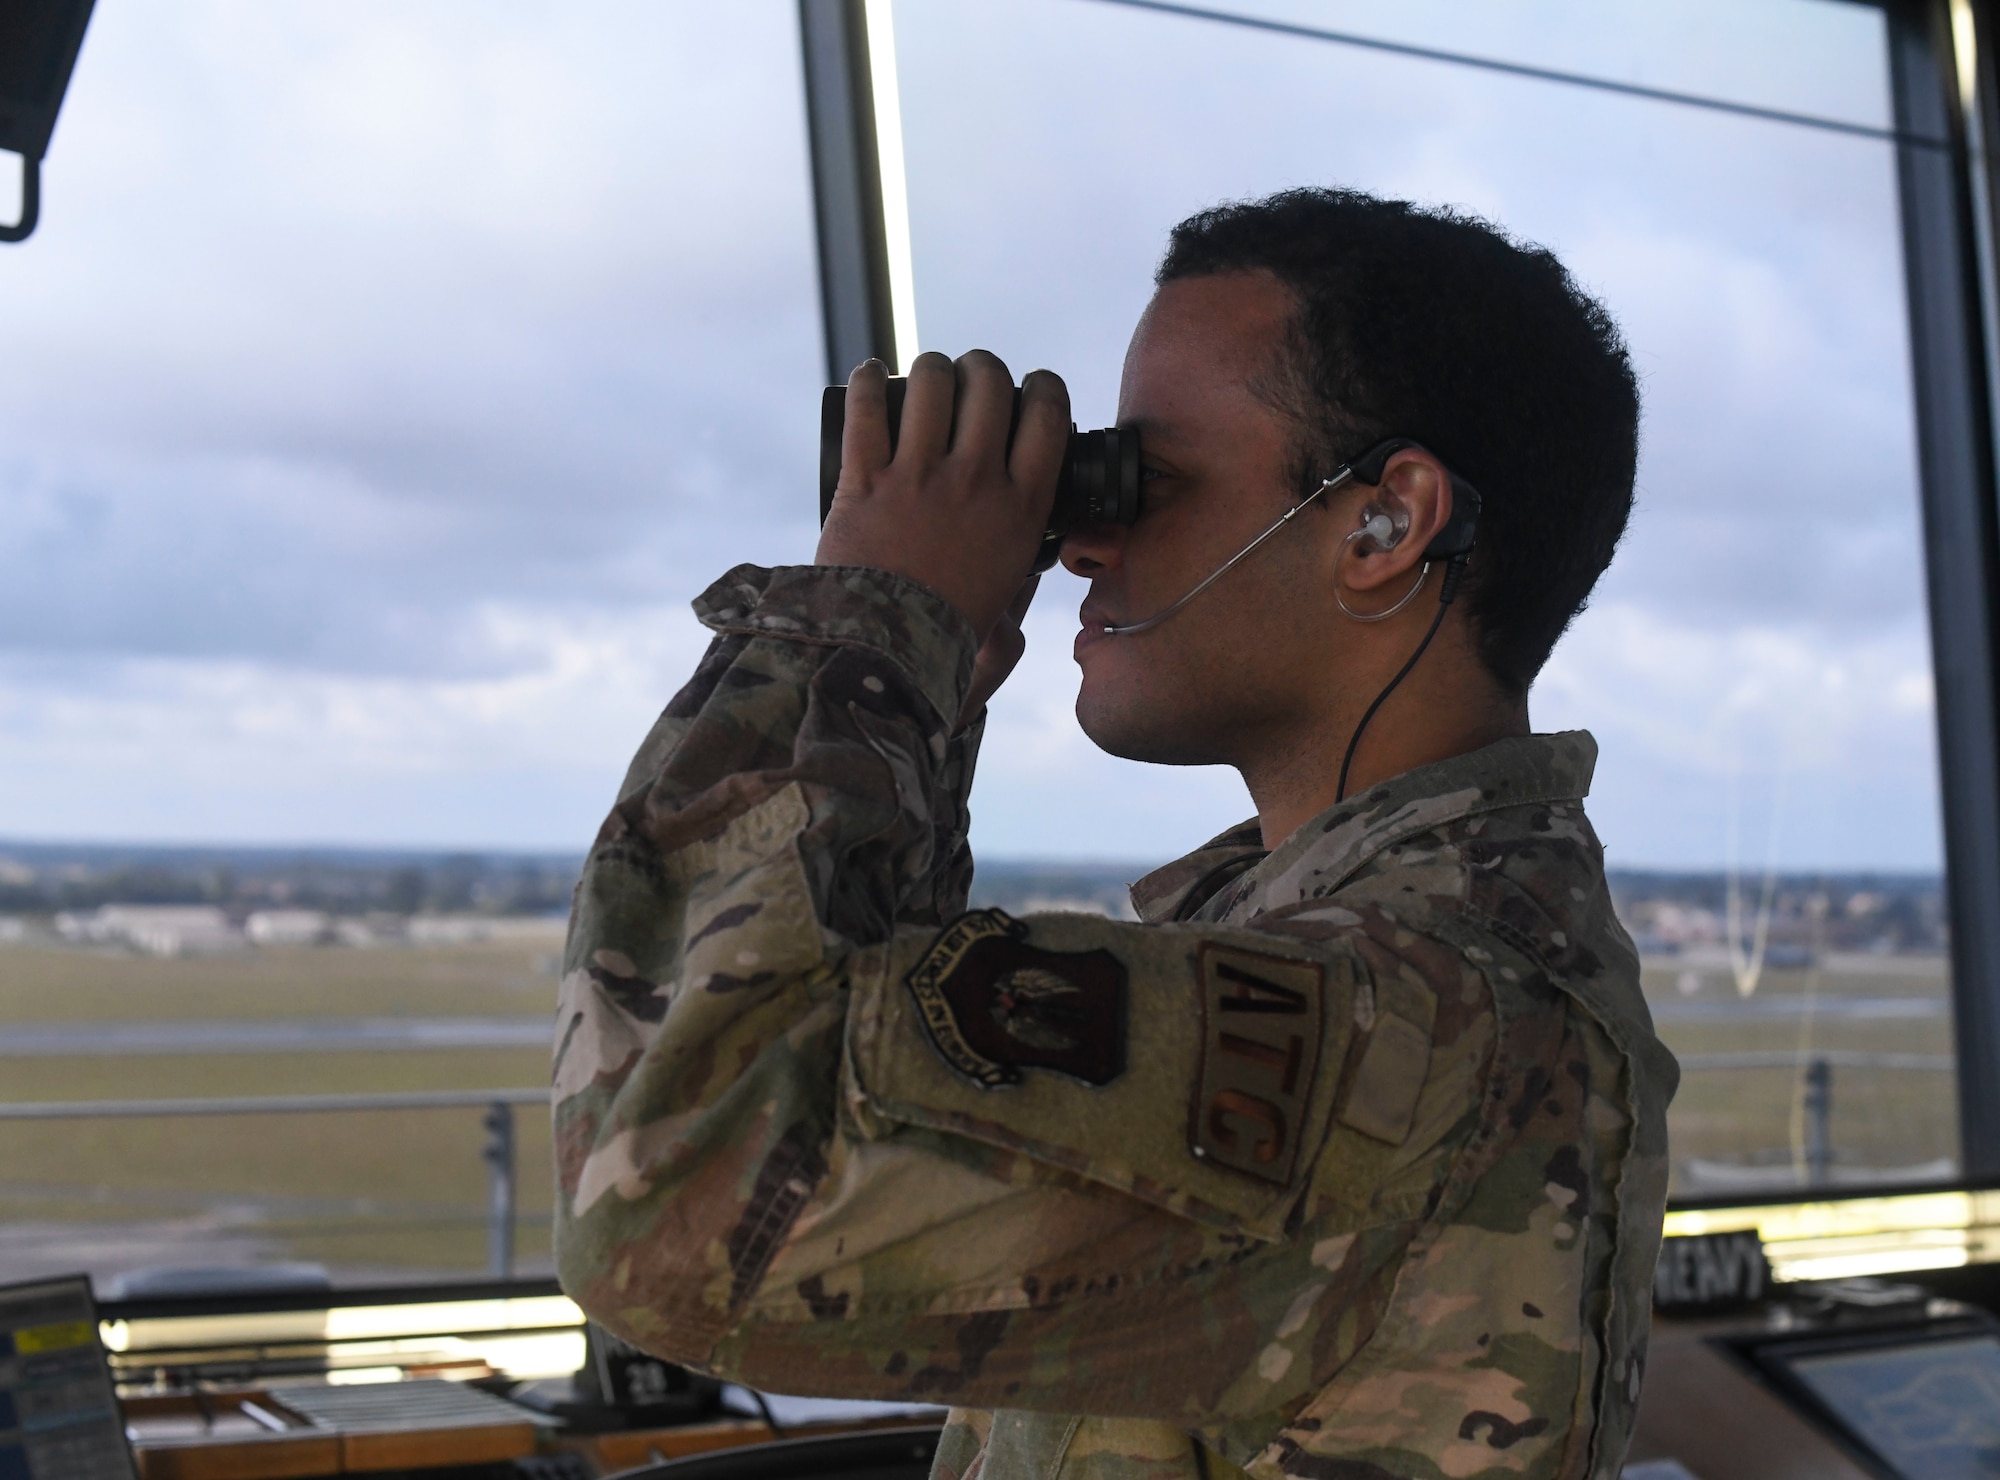 U.S. Senior Airman Malcolm Blair, 100th Operation Support Squadron air traffic controller, communicates with an incoming KC-135 Stratotanker aircraft July 28, 2021, at Royal Air Force Mildenhall, England. Aircrews and air traffic controllers are in constant communication within an estimated five miles of airspace. (U.S. Air Force photo by Senior Airman Antonia Herrera)